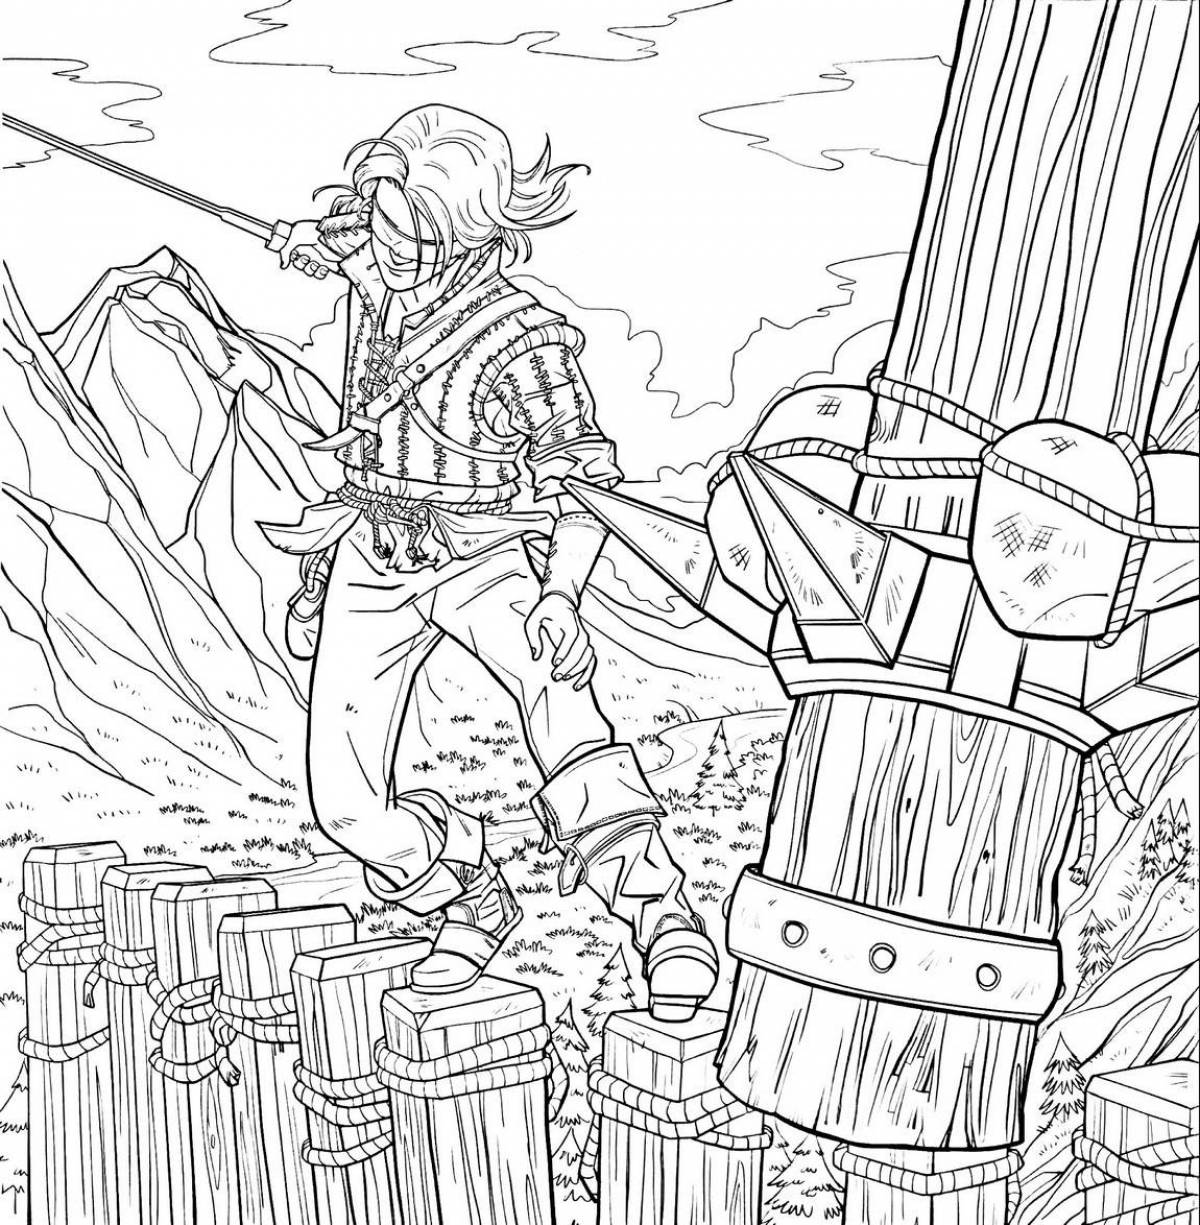 Fantastic witcher coloring page